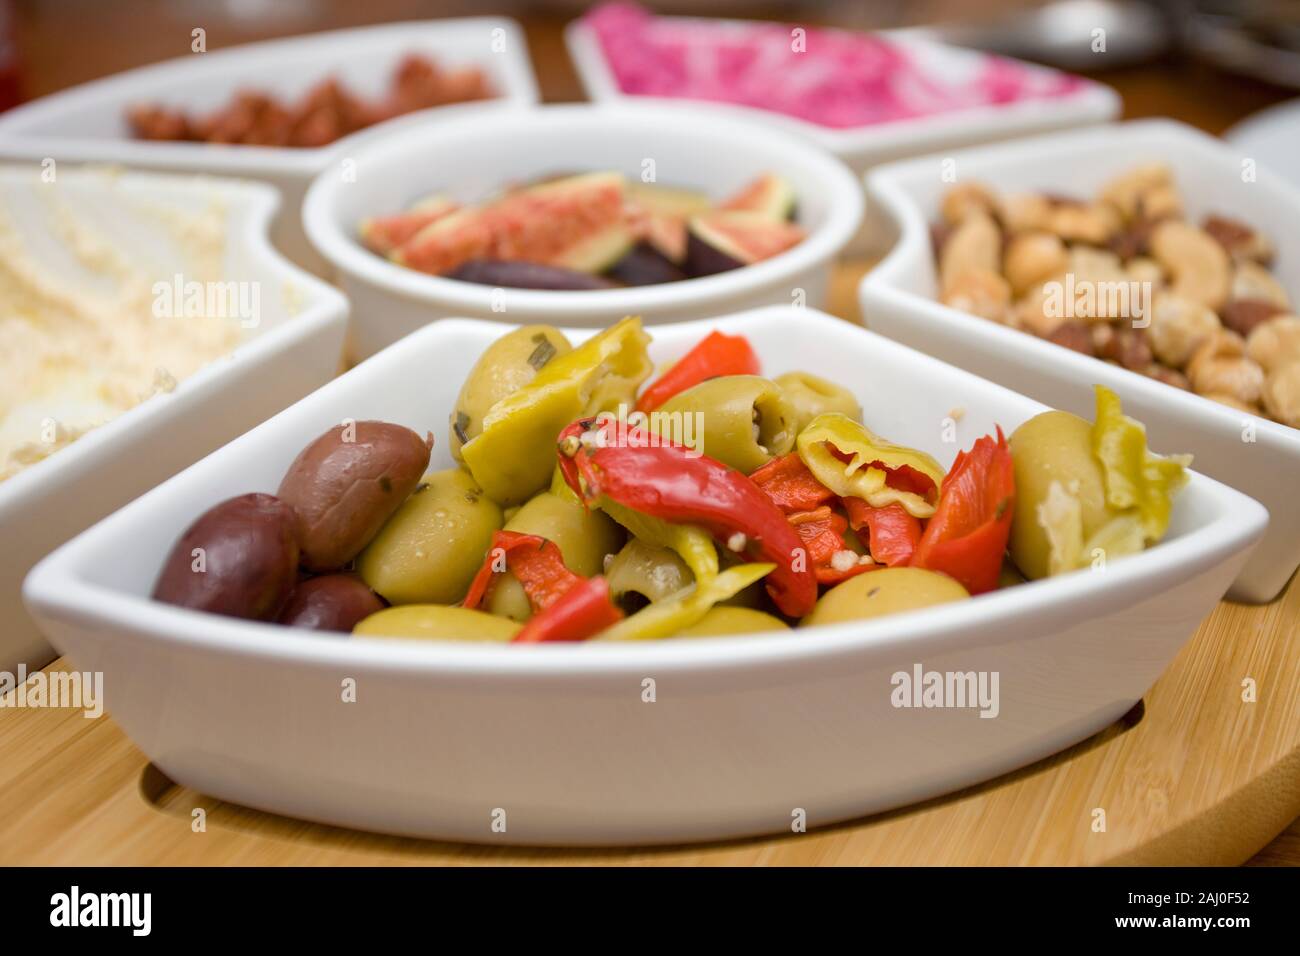 Lazy Susan with a variety of fresh foods on table Stock Photo